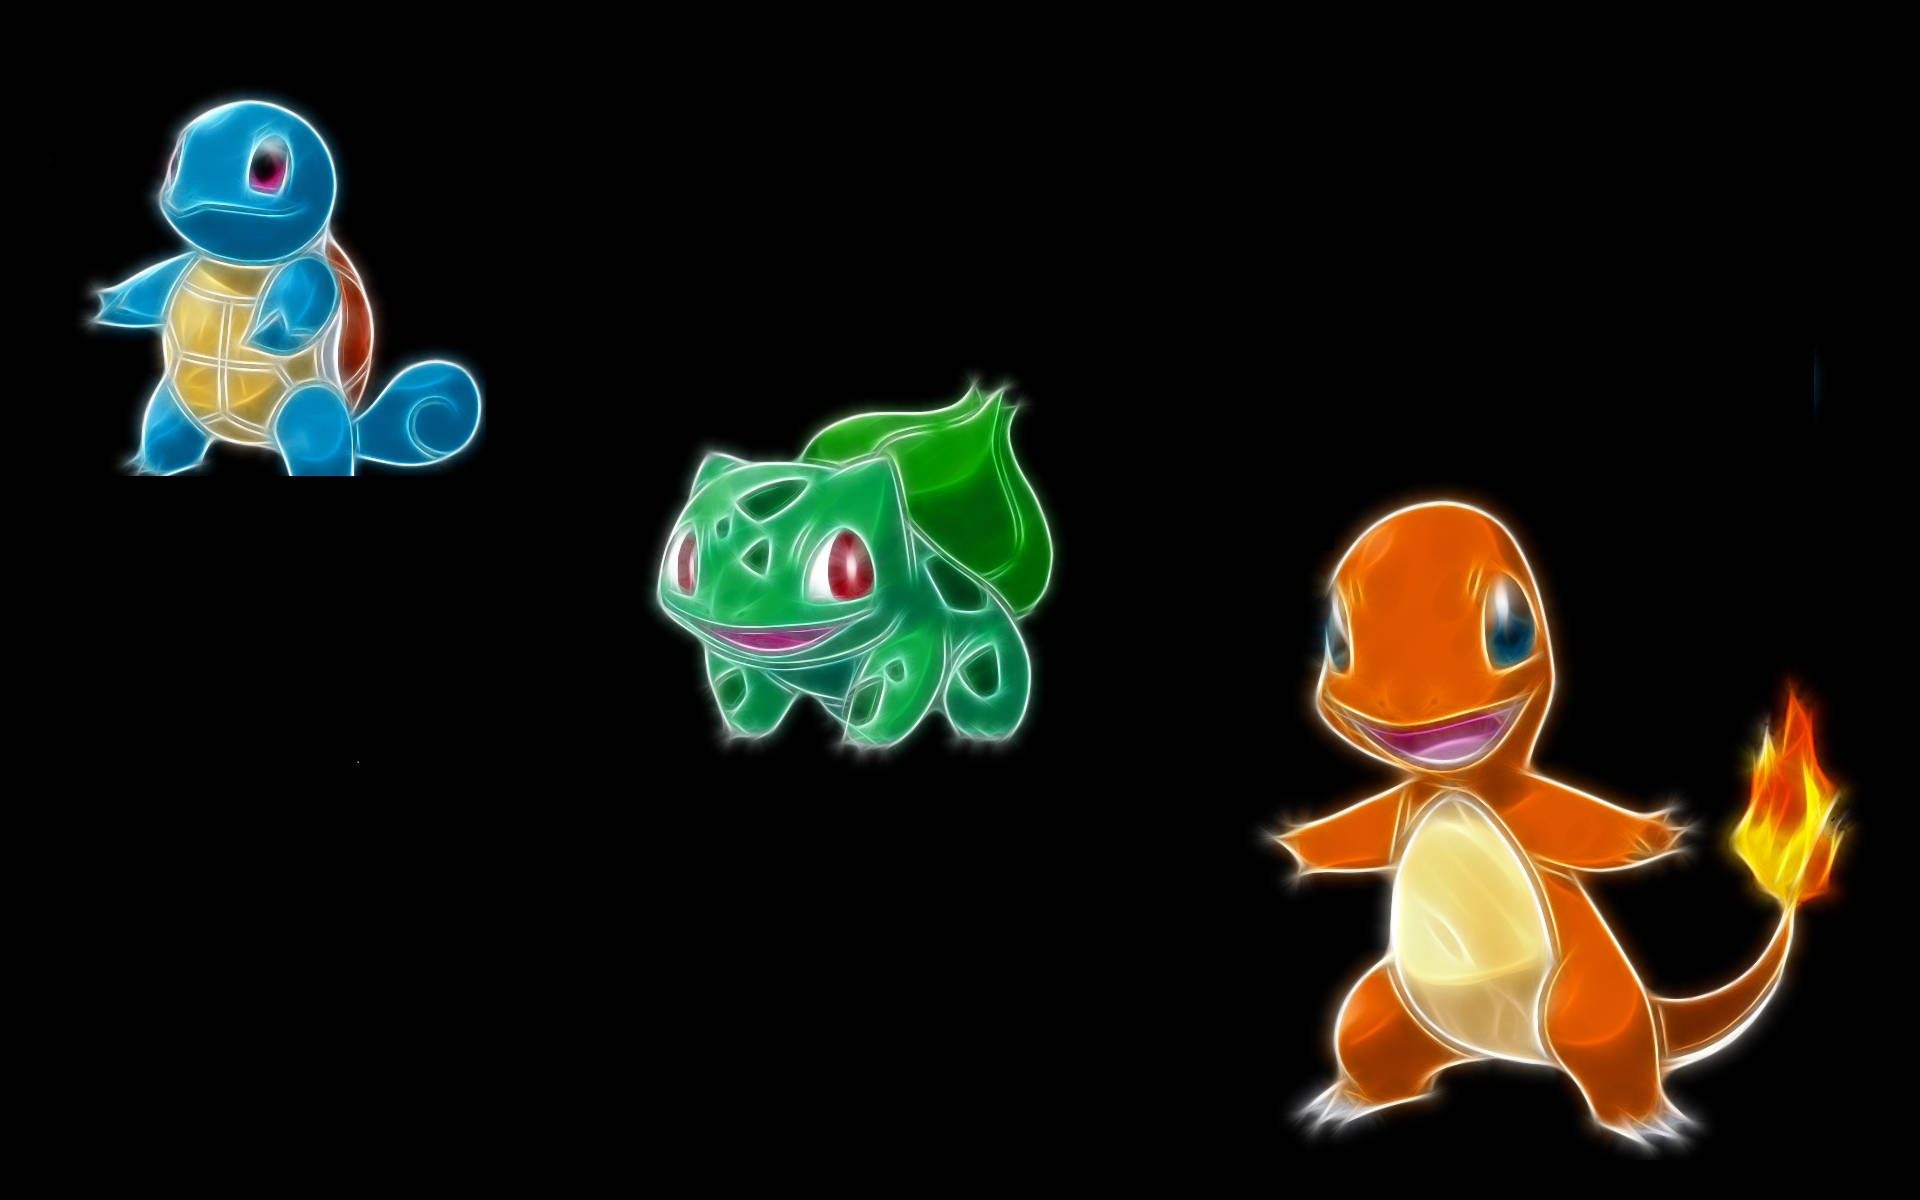 Light Up The Night With These Glowing Neon Squirtles And Their Friends!